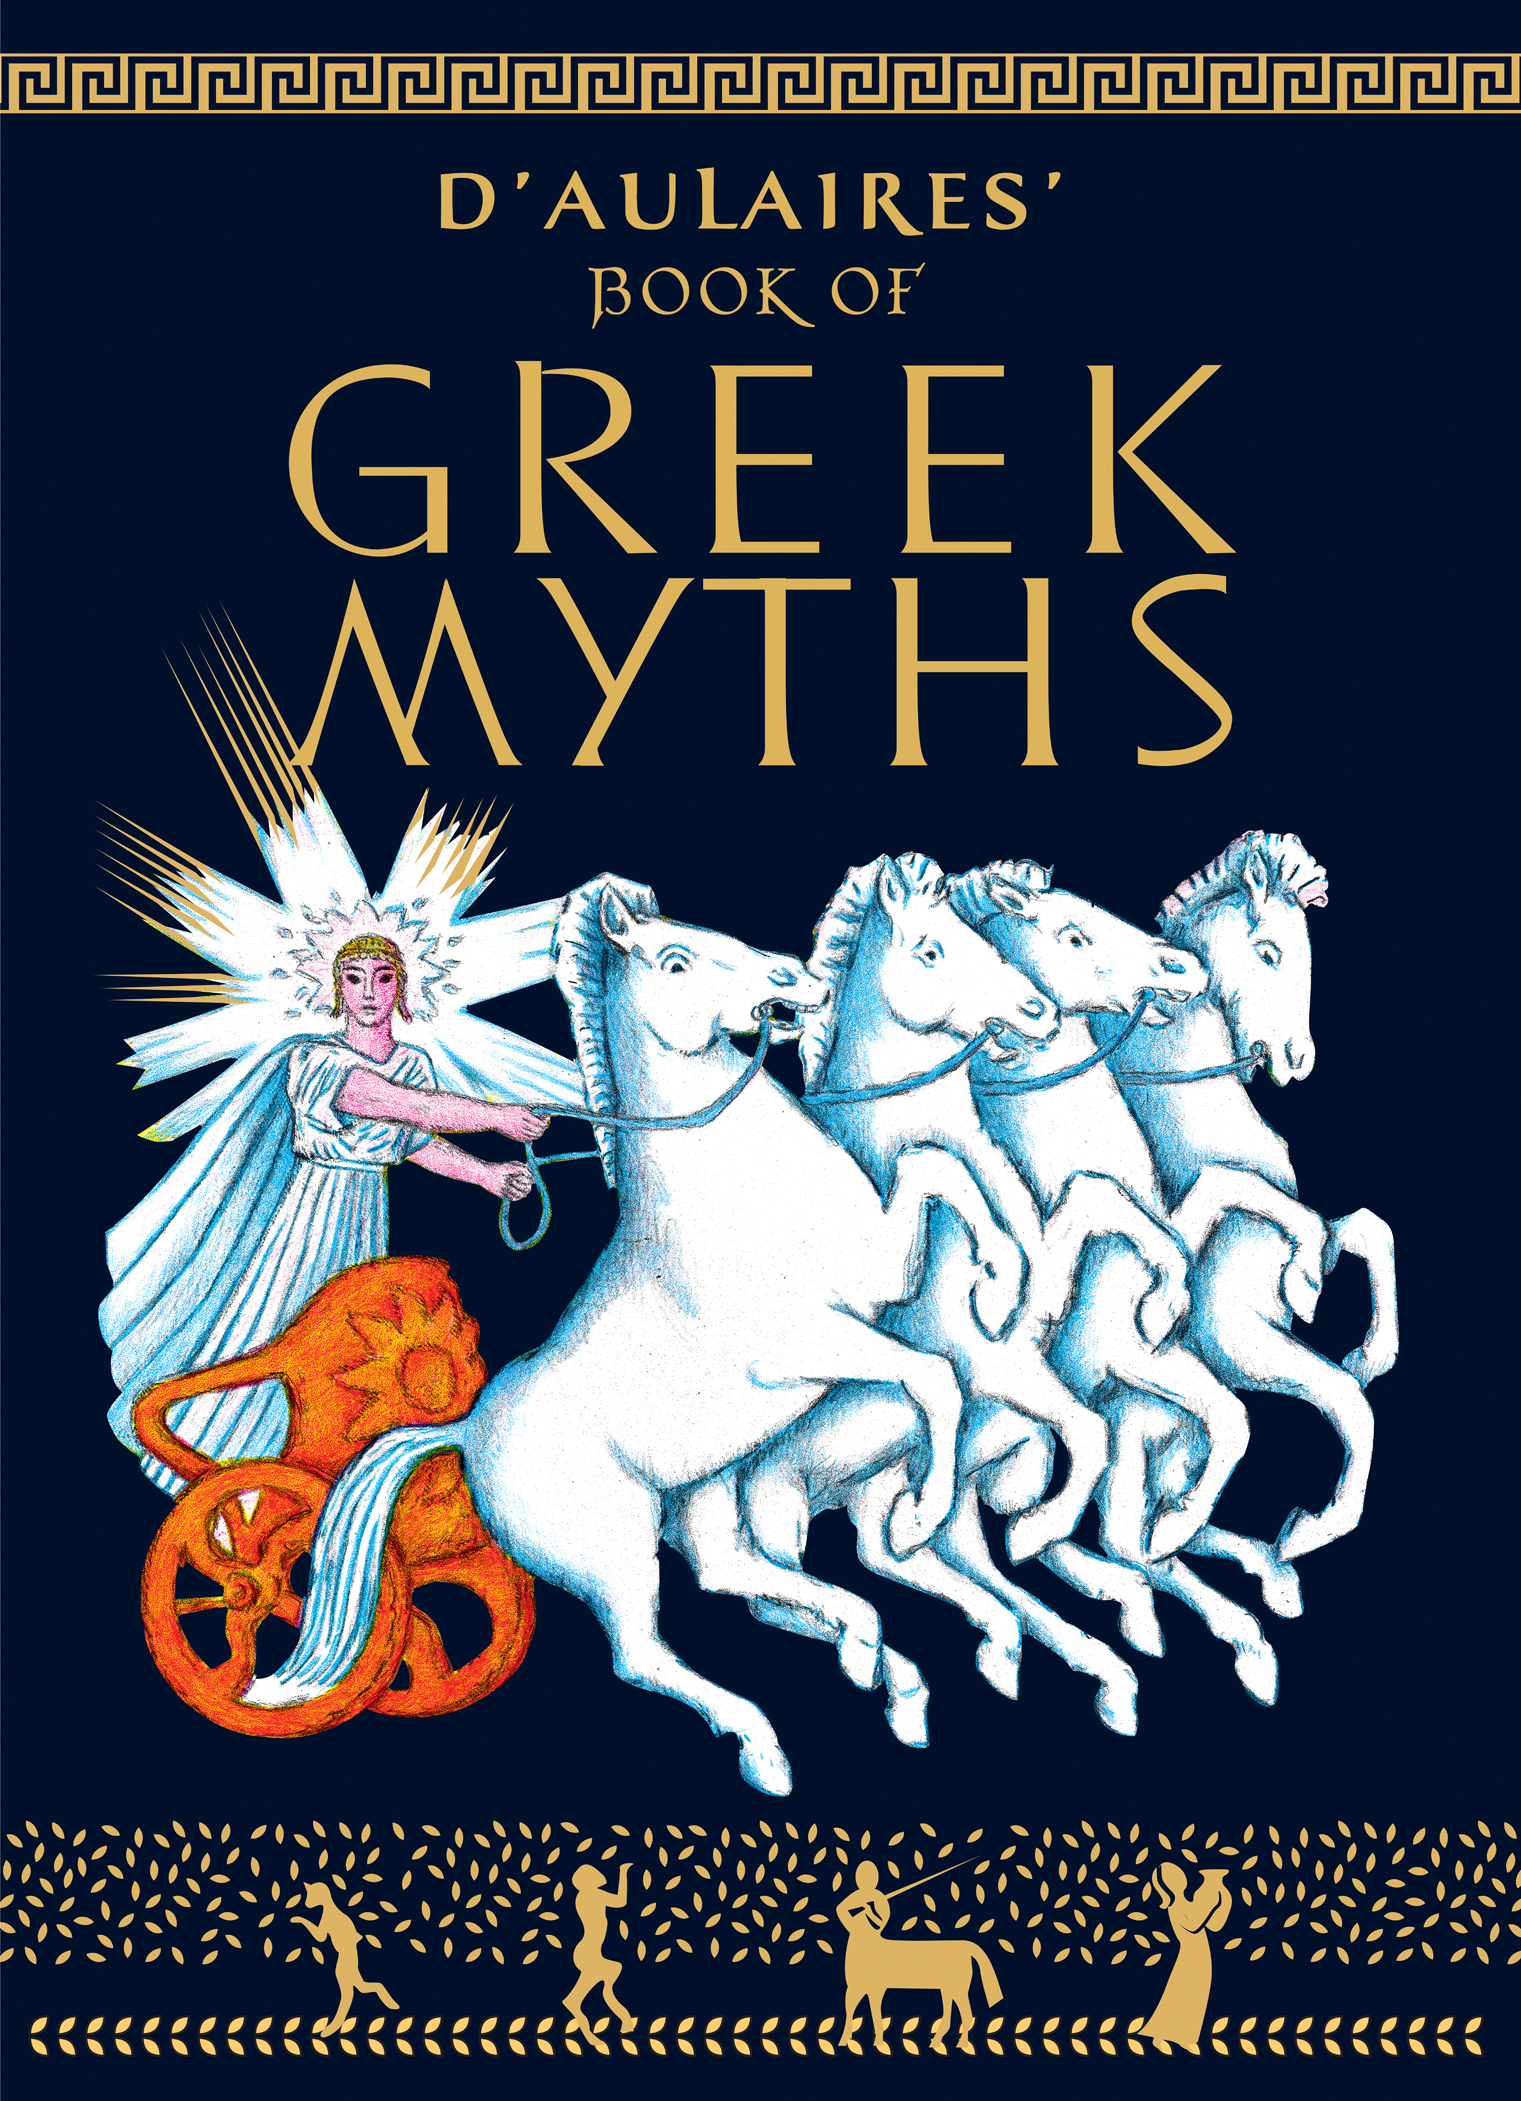 DAulaires Book of Greek Myths - photo 1